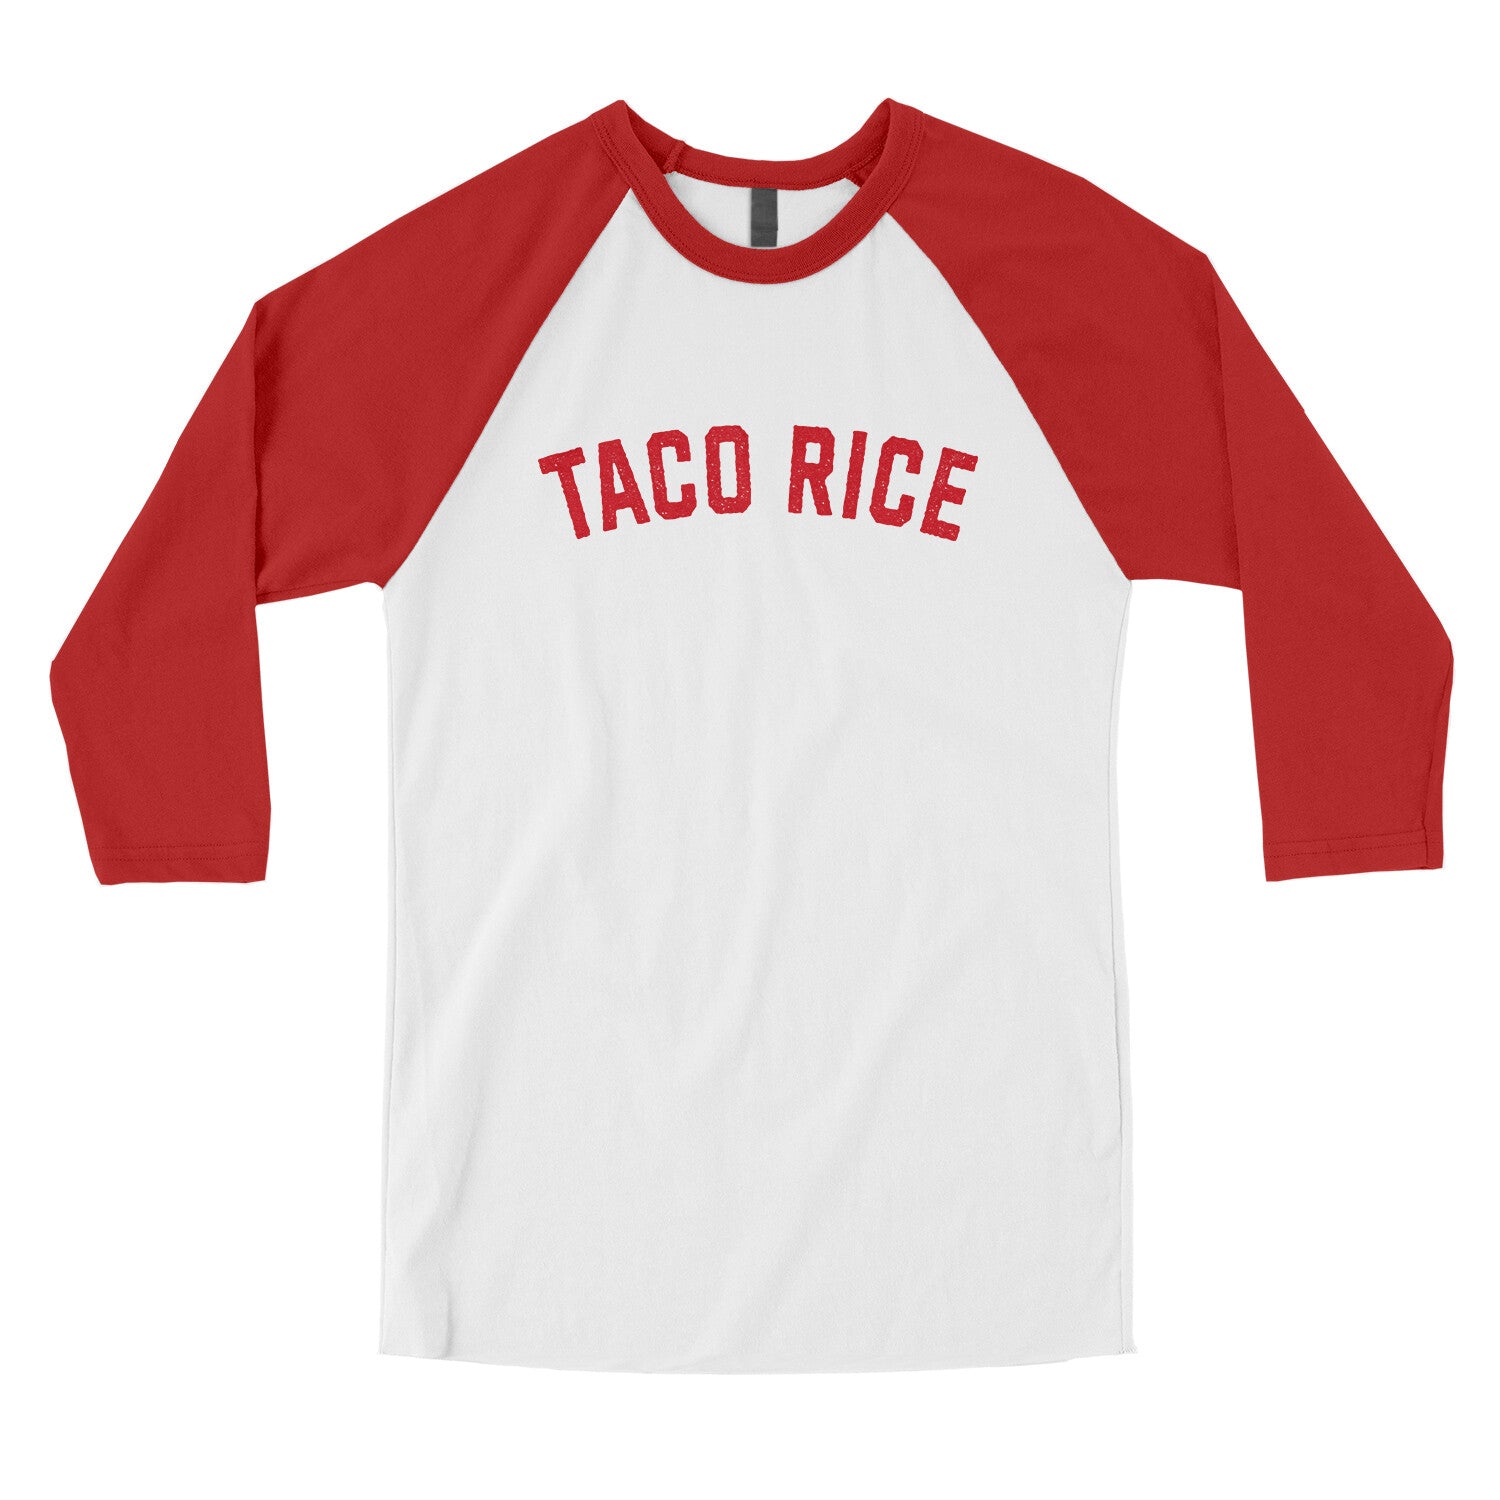 Taco Rice in White with Red Color